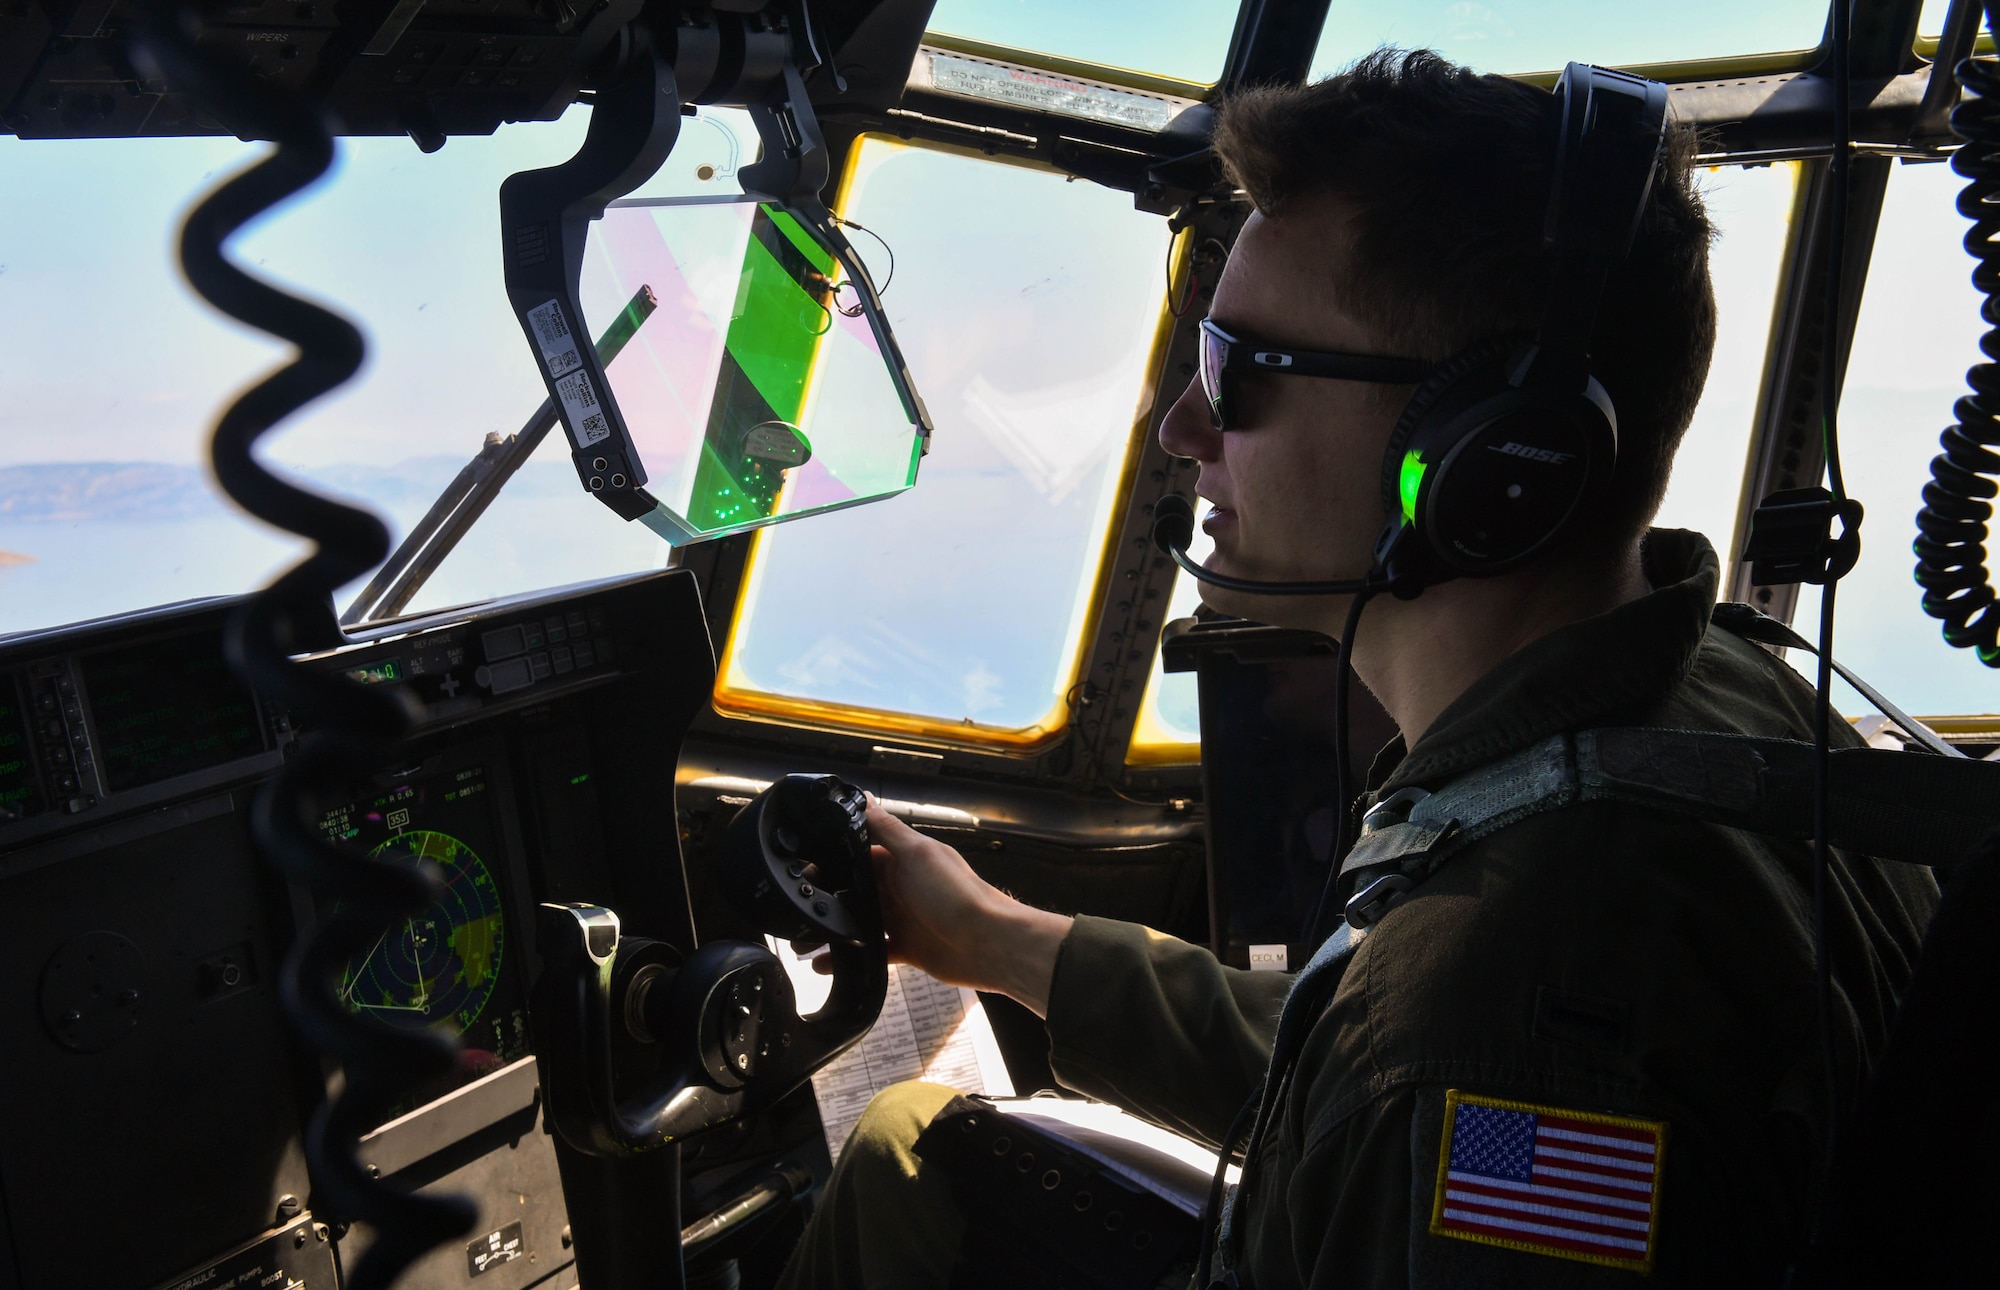 U.S. Air Force 1st Lt. Nicholas Gibson, 37th Airlift Squadron pilot, flies a C-130J Super Hercules during Exercise Stolen Cerberus IV near Elefsis Air Base, Greece, April 26, 2017. Pilots from the 37th AS were able to train in low-level flying during the exercise that is not available at Ramstein. As NATO allies, the U.S. and Greece share a commitment to promote peace and stability, and seek opportunities to continue developing their strong relationship. (U.S Air Force photo by Senior Airman Tryphena Mayhugh)